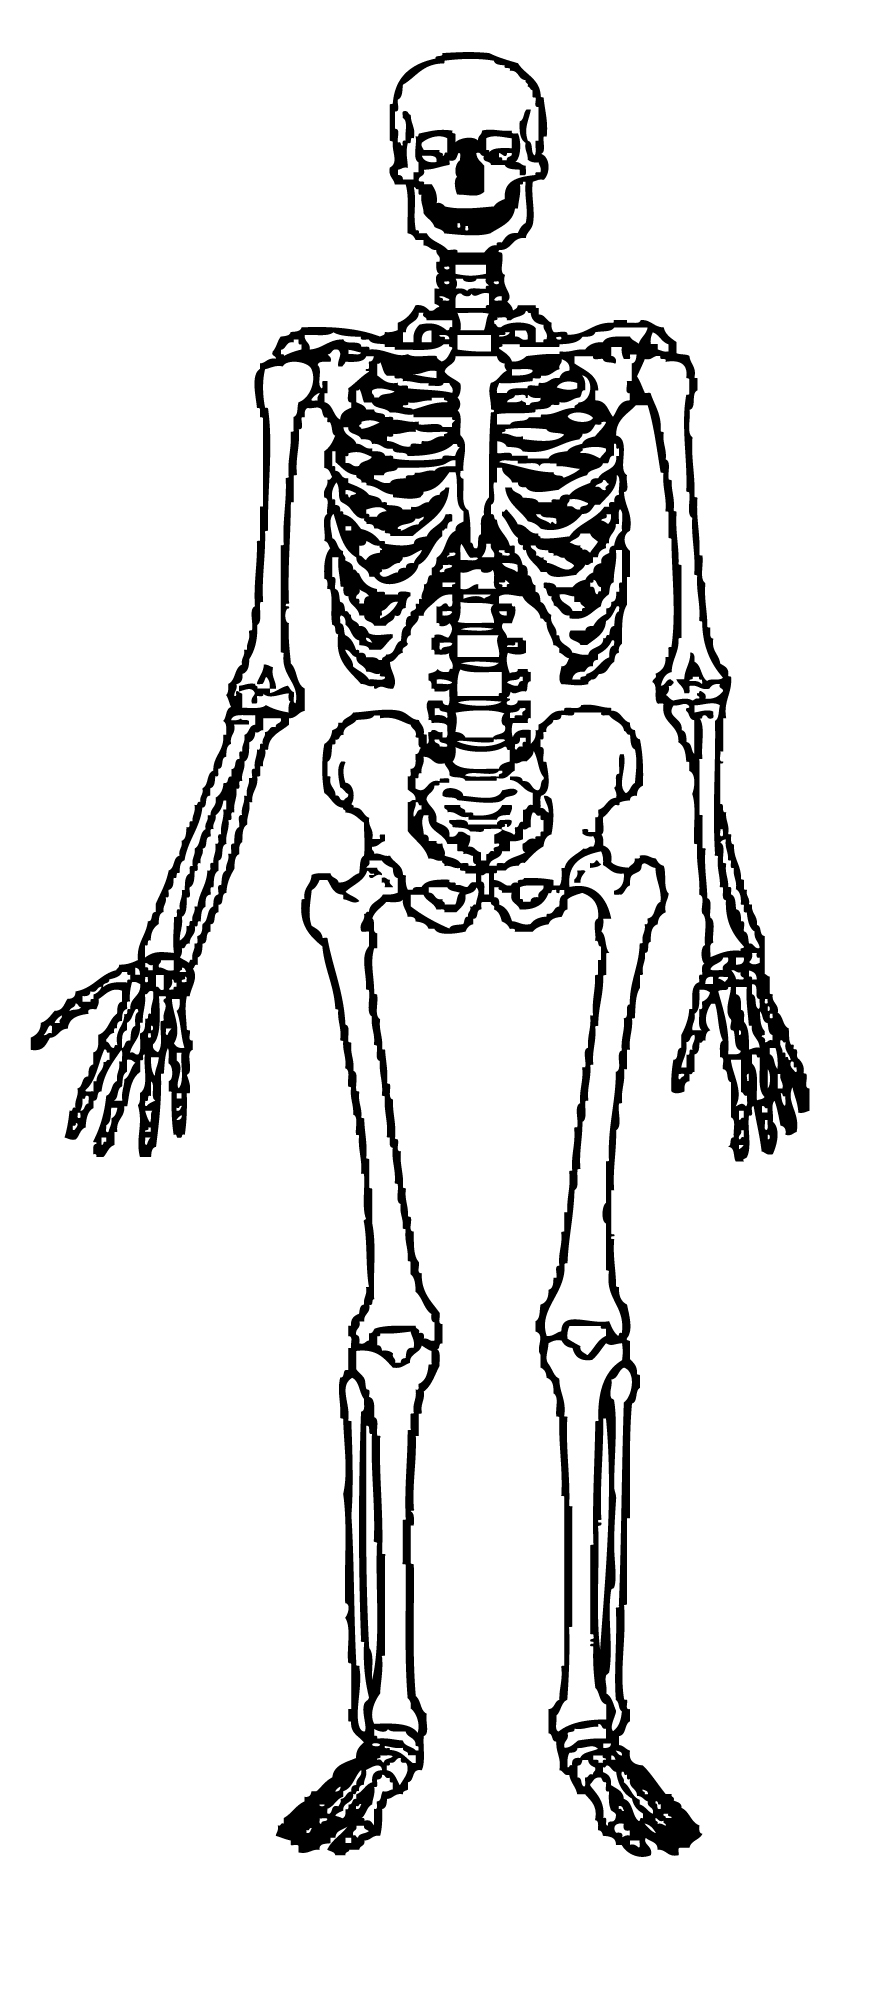 Skeleton clipart free clipart images clipartcow